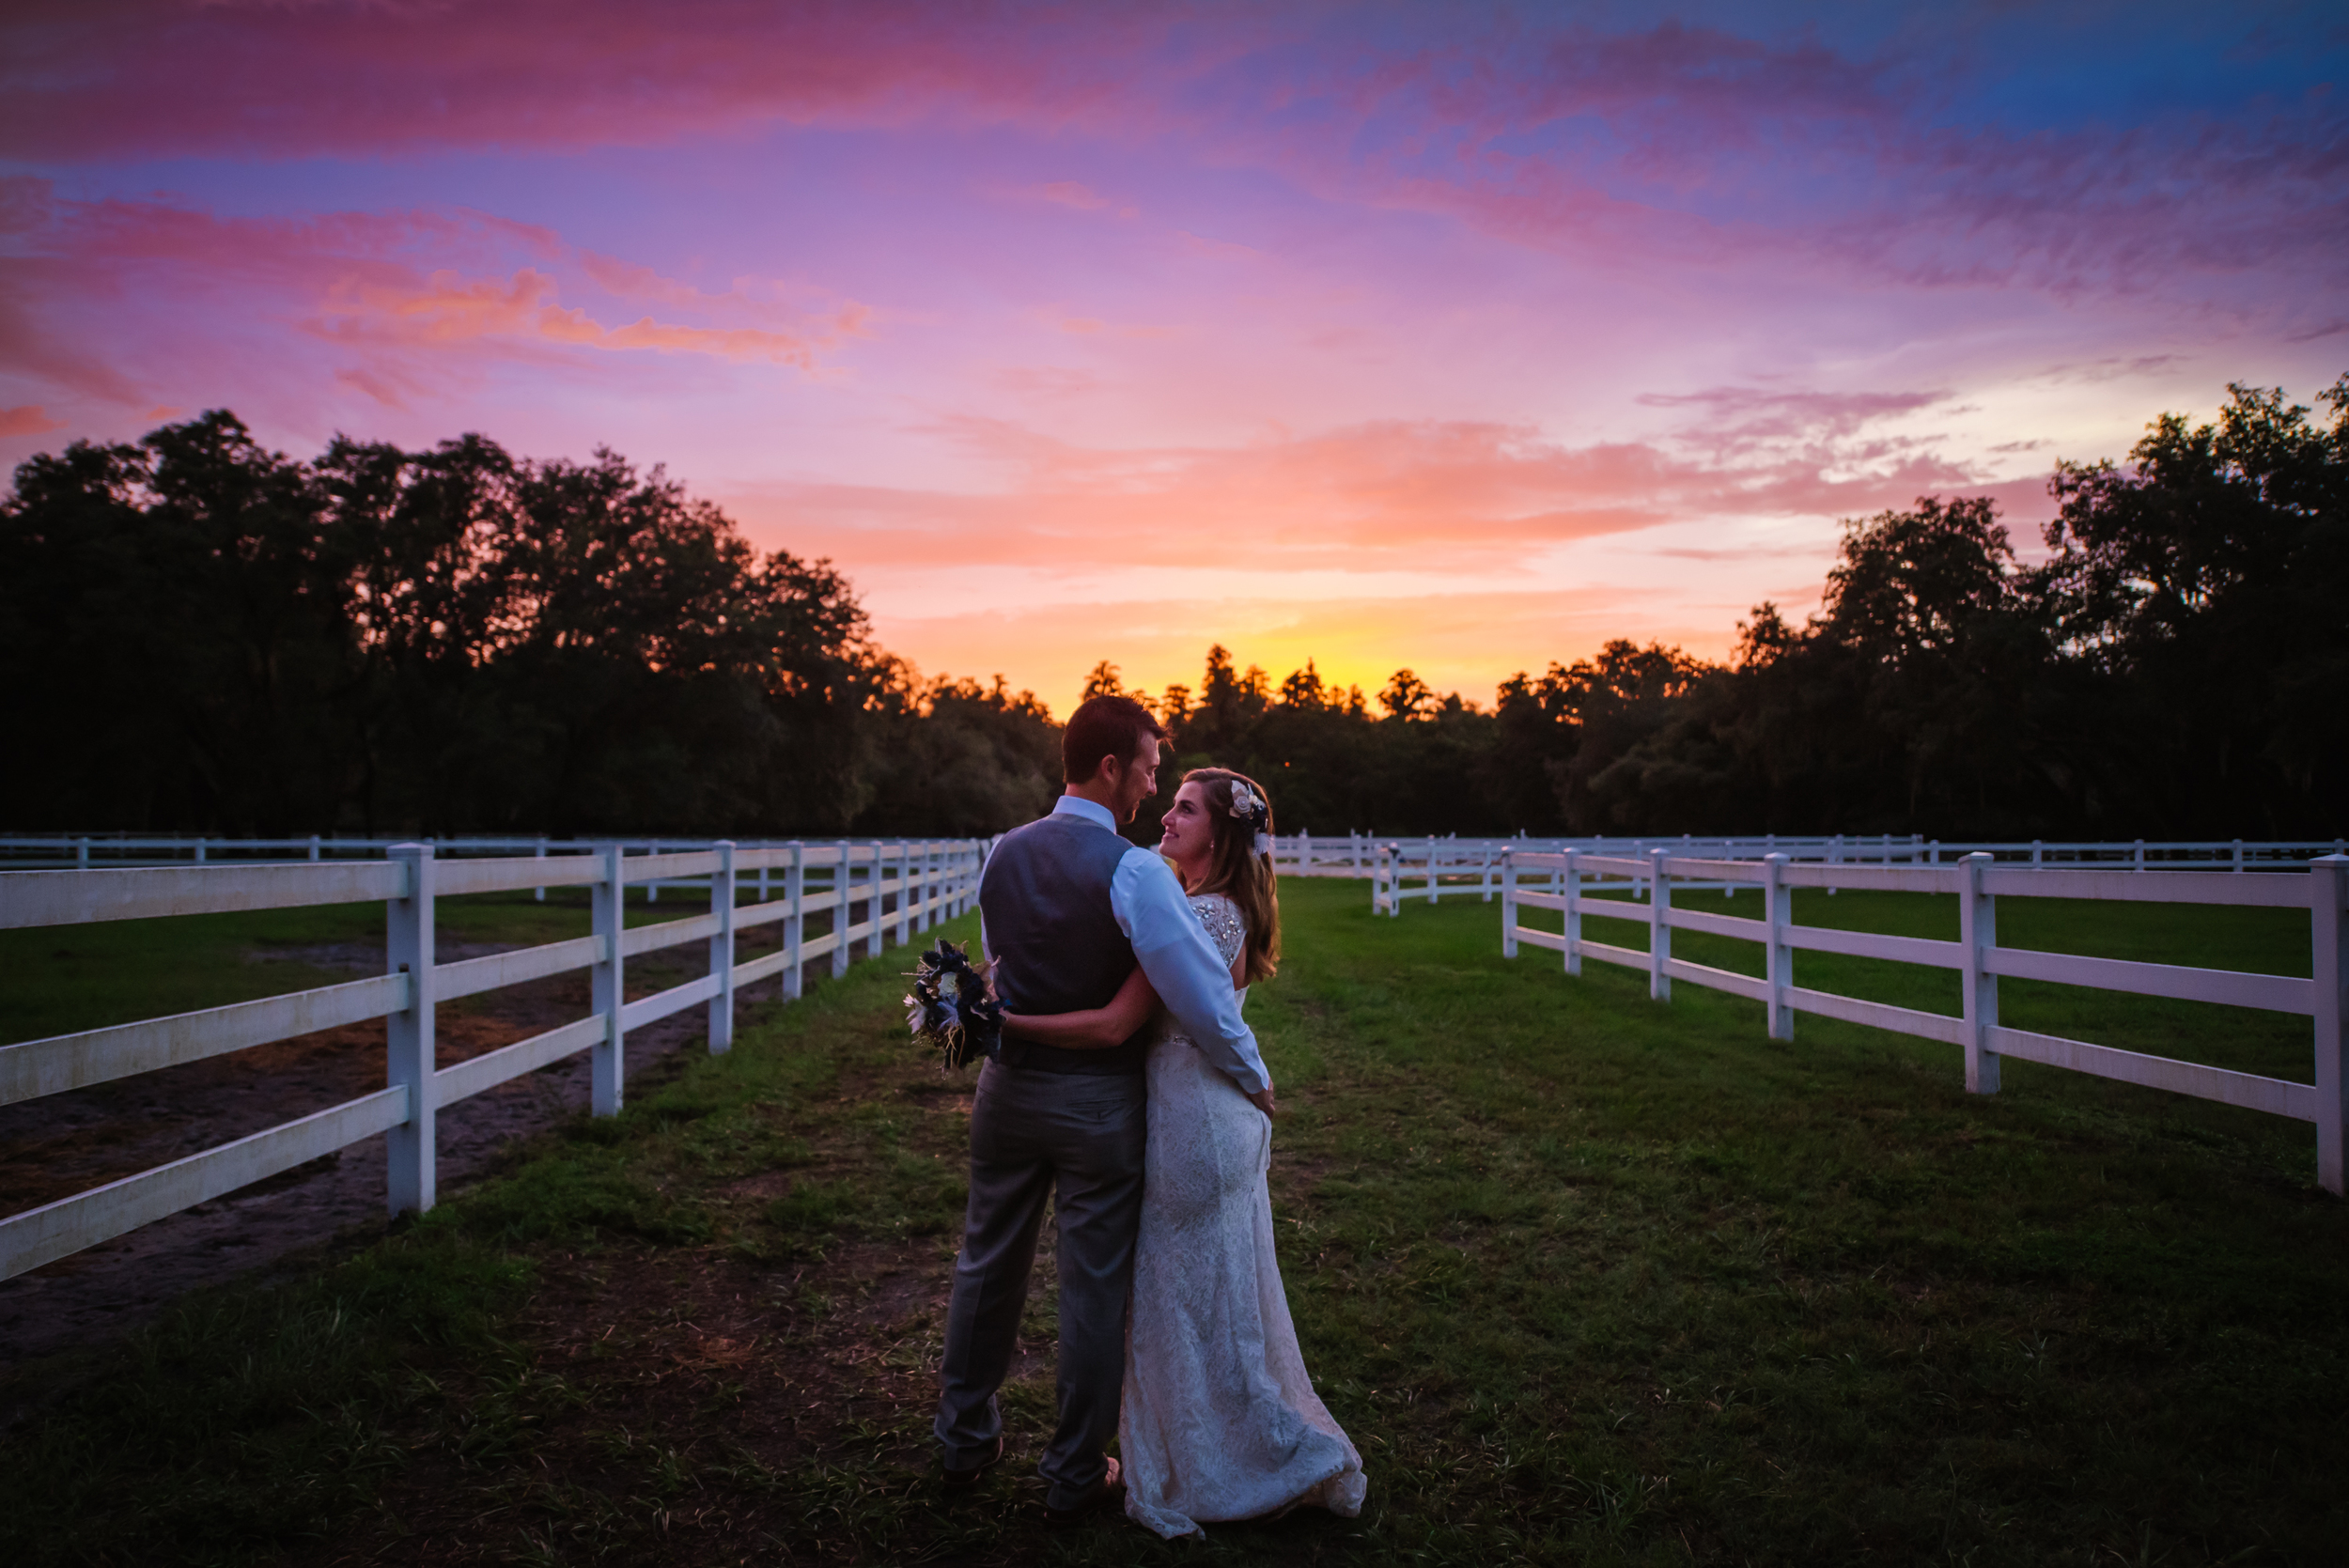 Scottie &amp; Tyler had a lovely wedding at the Lange farm. Even though we had to go to plan B for the ceremony due to rain they stayed smiling and were rewarded with an incredible sunset!